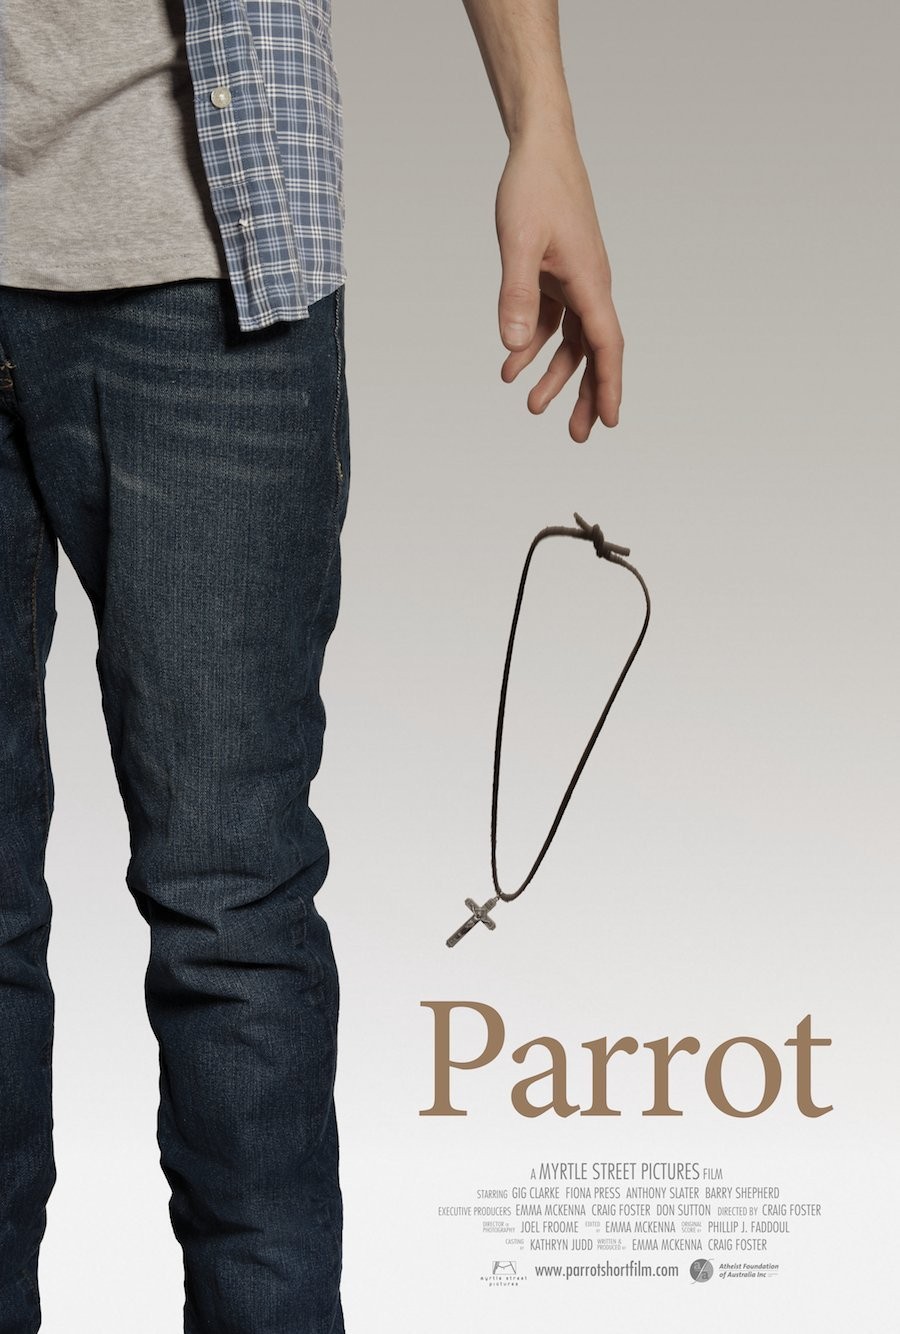 Extra Large Movie Poster Image for Parrot